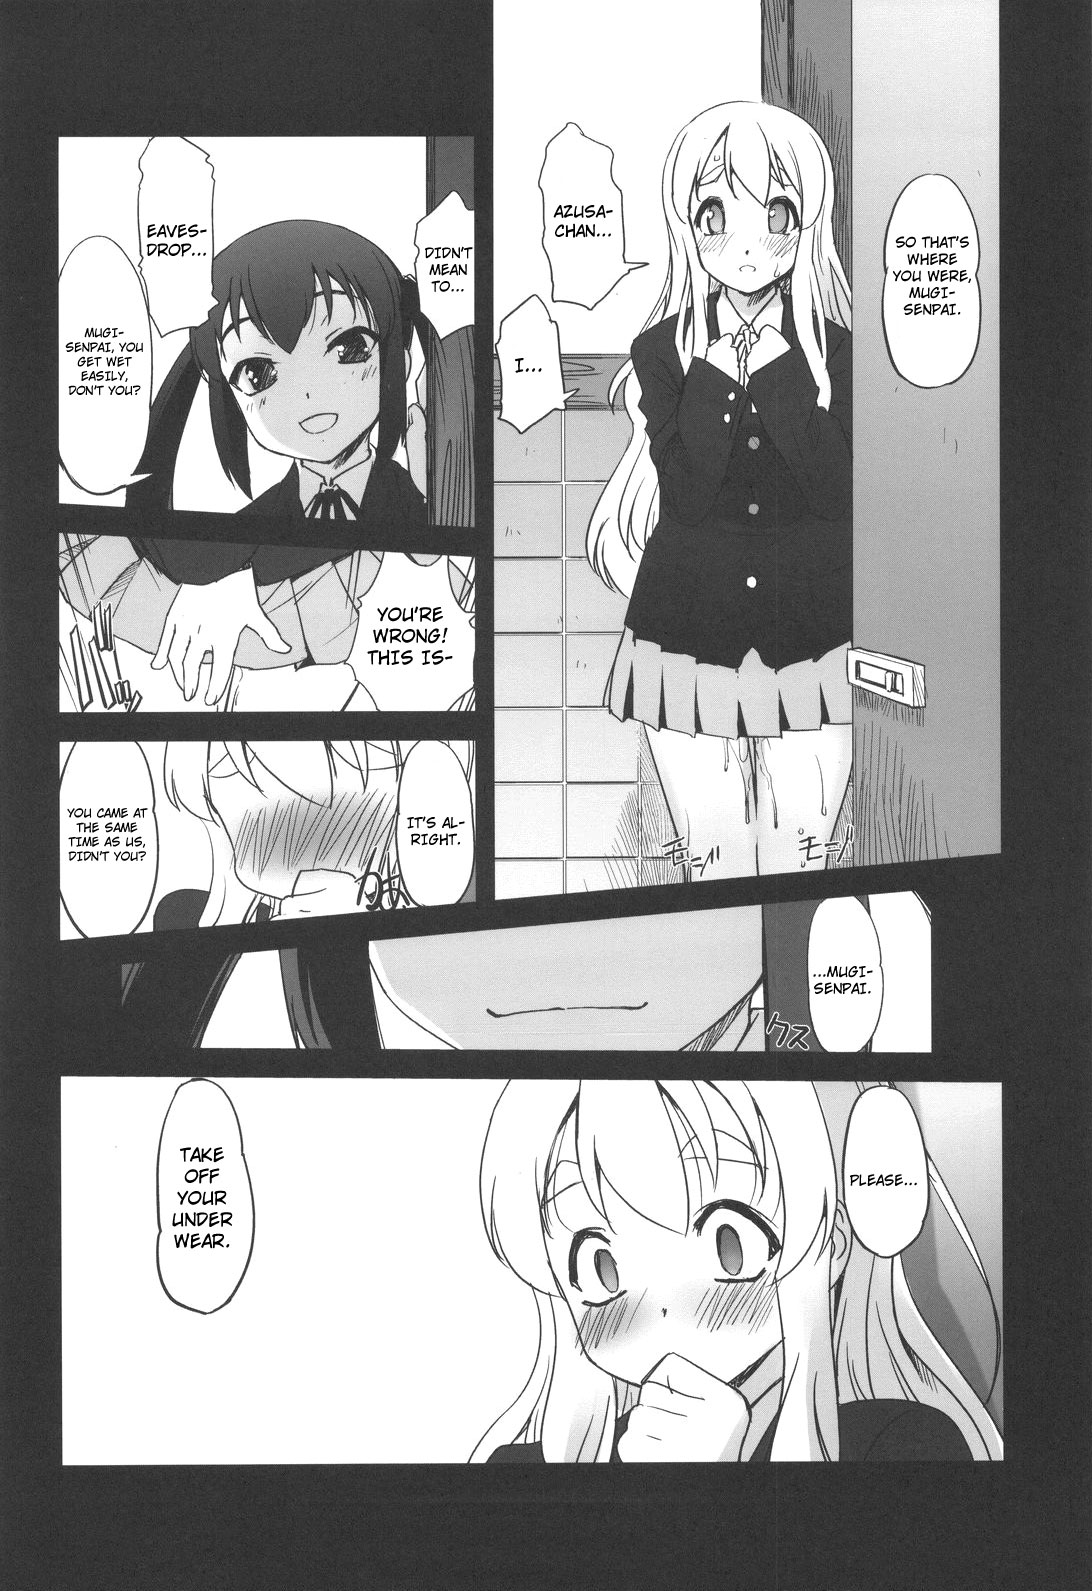 (C76) [G-Power! (Sasayuki)] Nekomimi to Toilet to Houkago no Bushitsu | Cat Ears And A Restroom And The Club Room After School (K-ON) [English] [Nicchiscans-4Dawgz] page 17 full